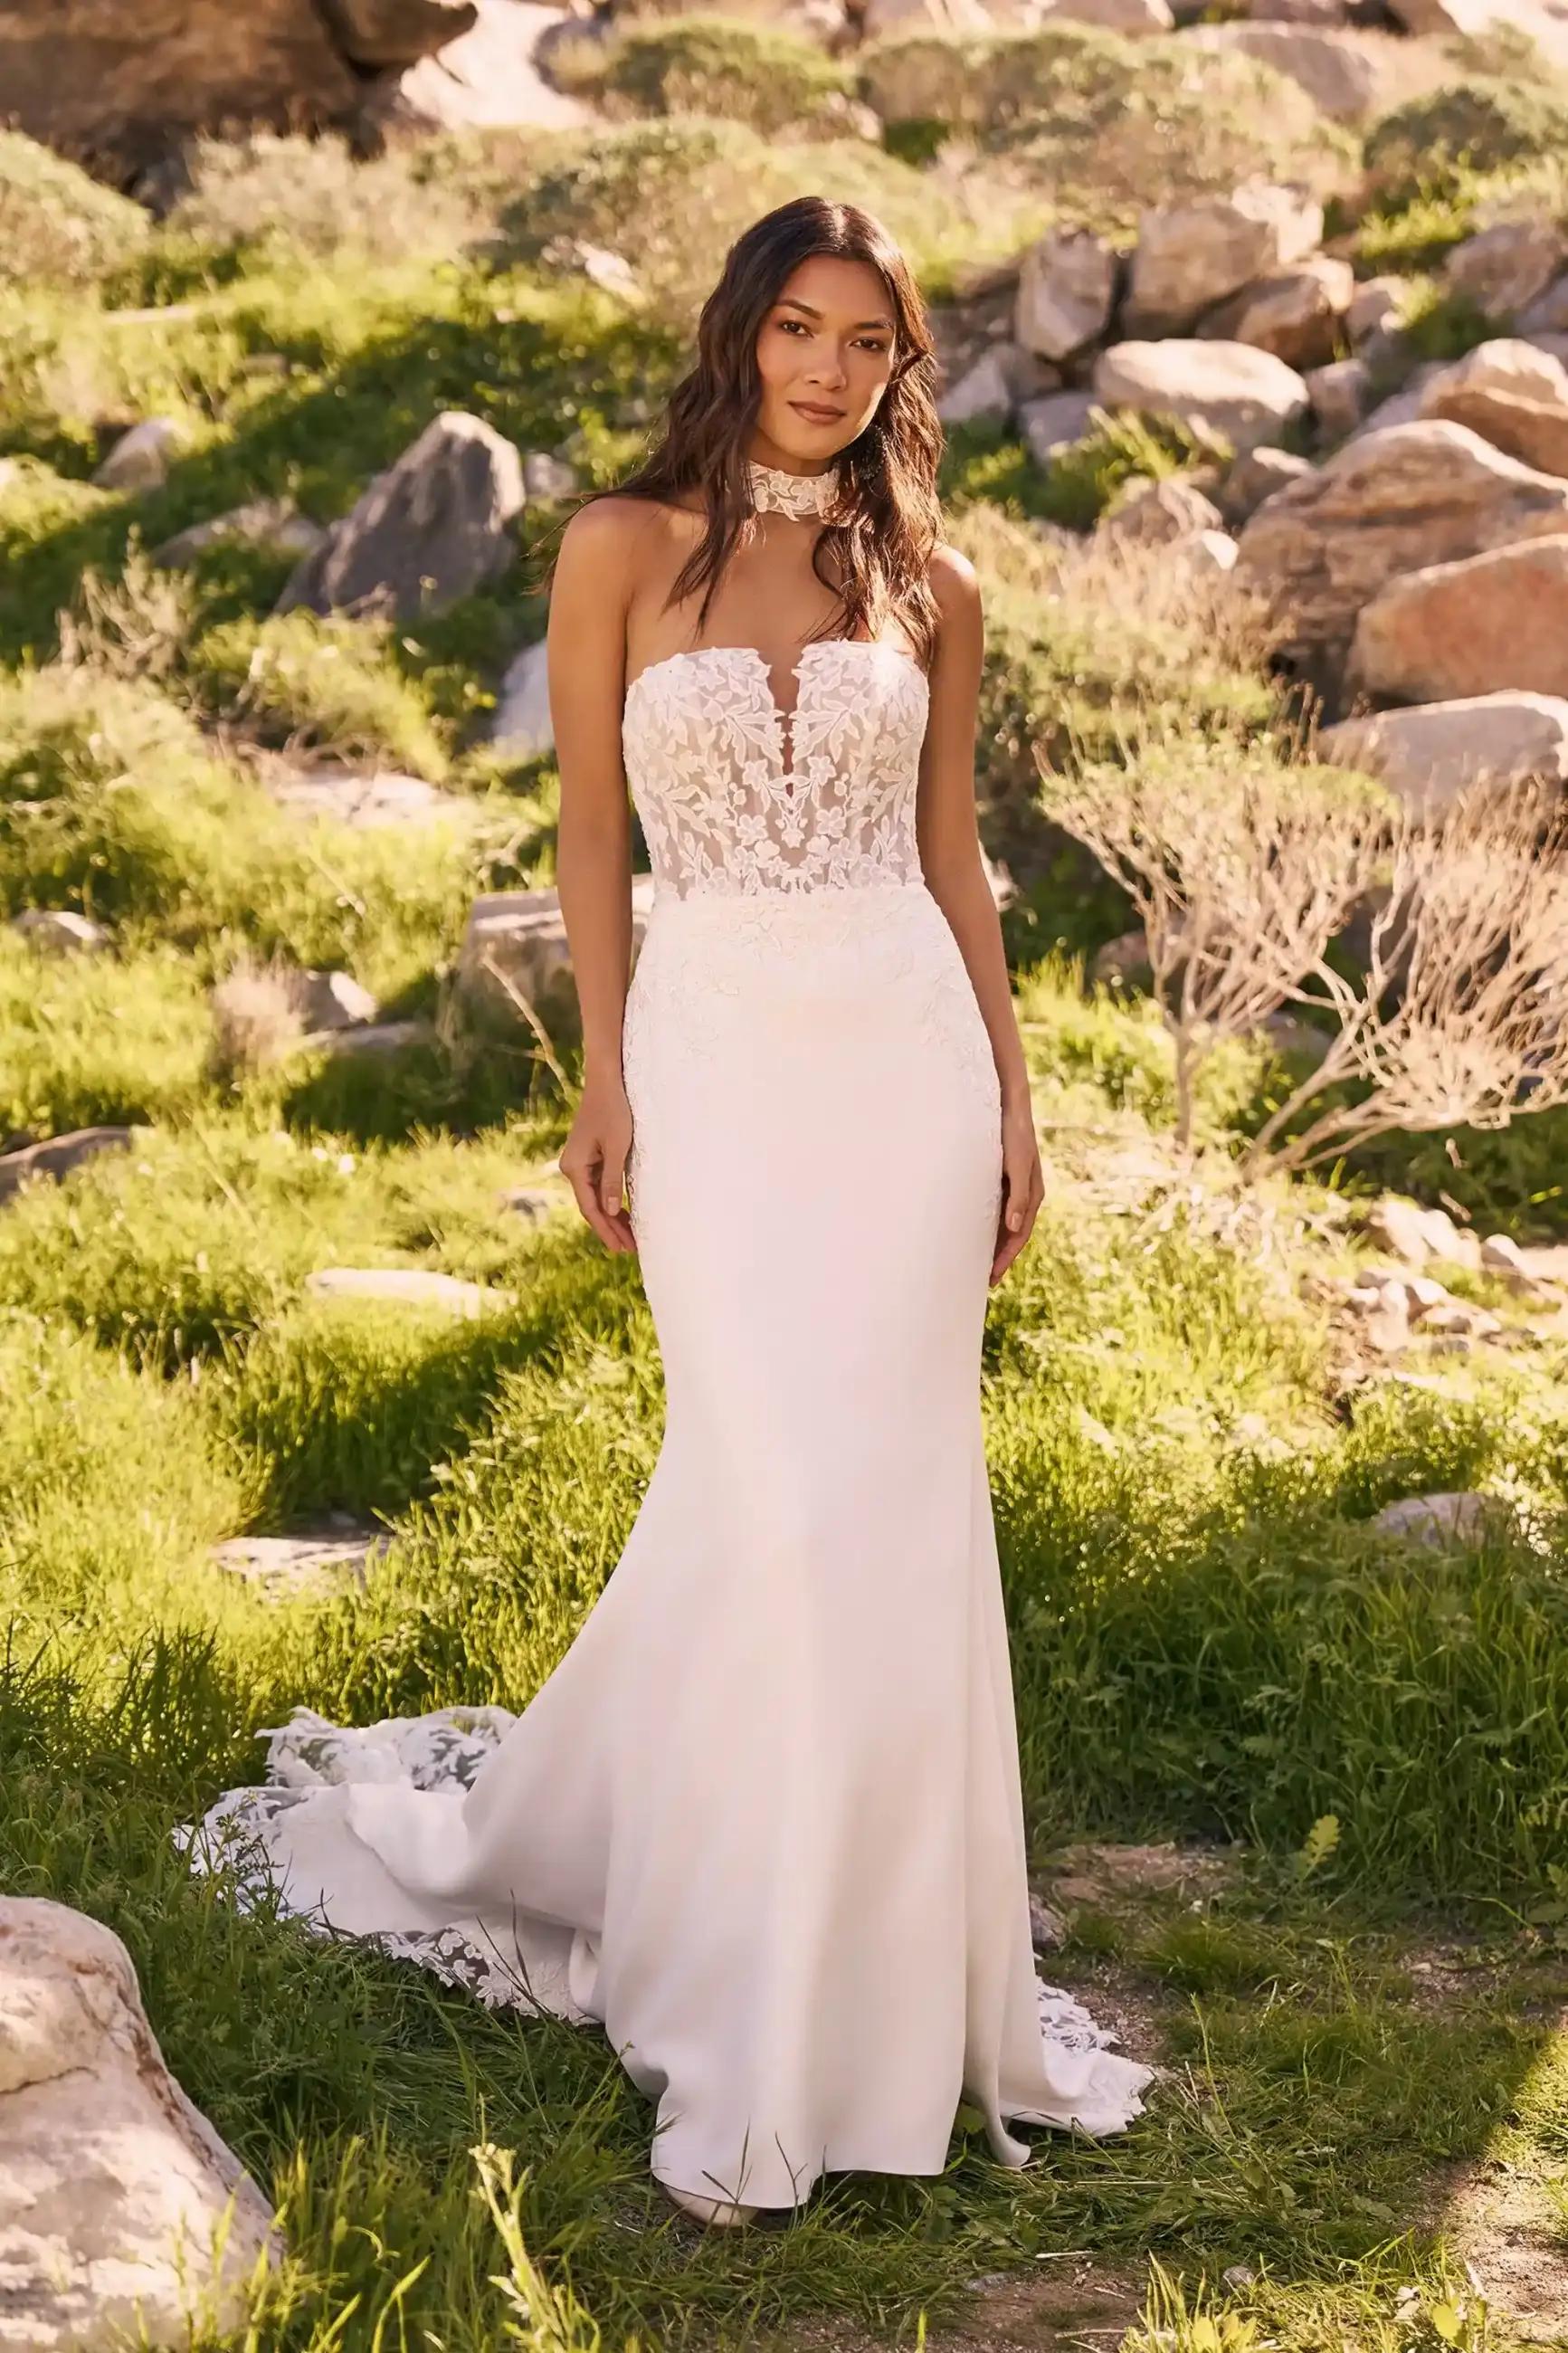 Featuring the Latest Collections Available at Anna Christine Bridal Image